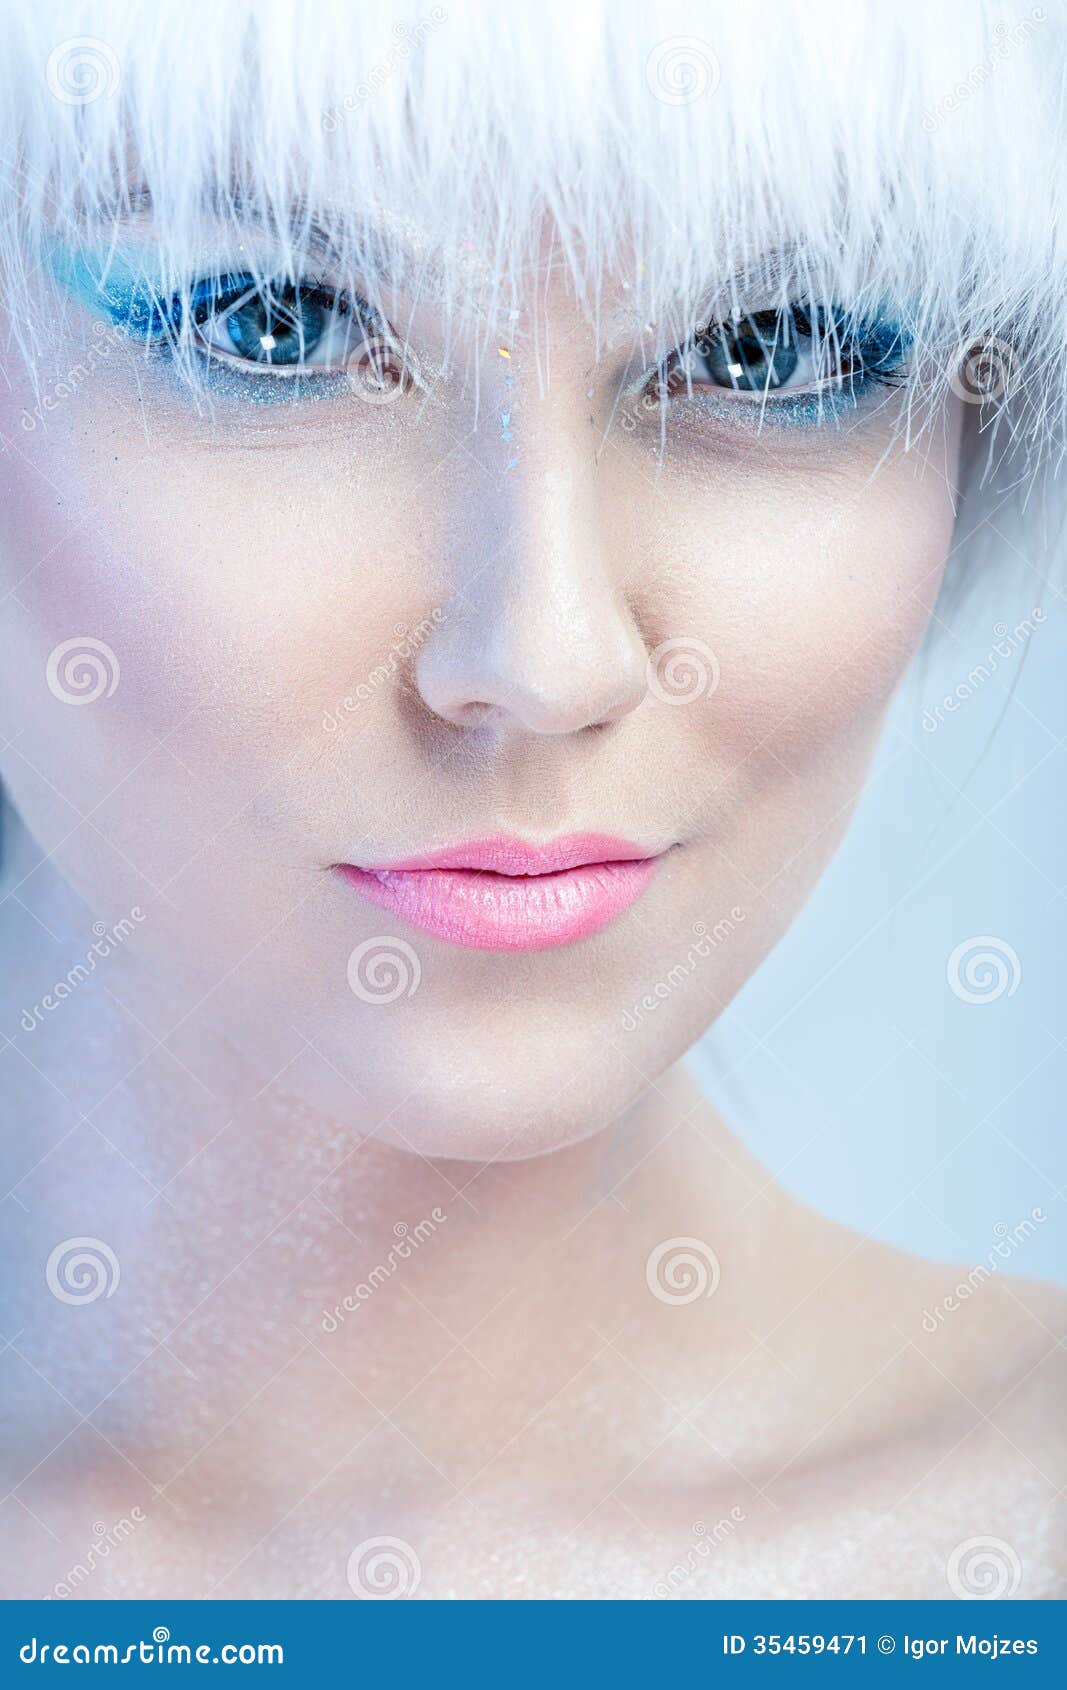 Frosty Makeup - Cool Elegance.Portrait, Close-up On The Face Of A Woman In  A Fancy Makeup. Stock Photo, Picture and Royalty Free Image. Image 38736774.